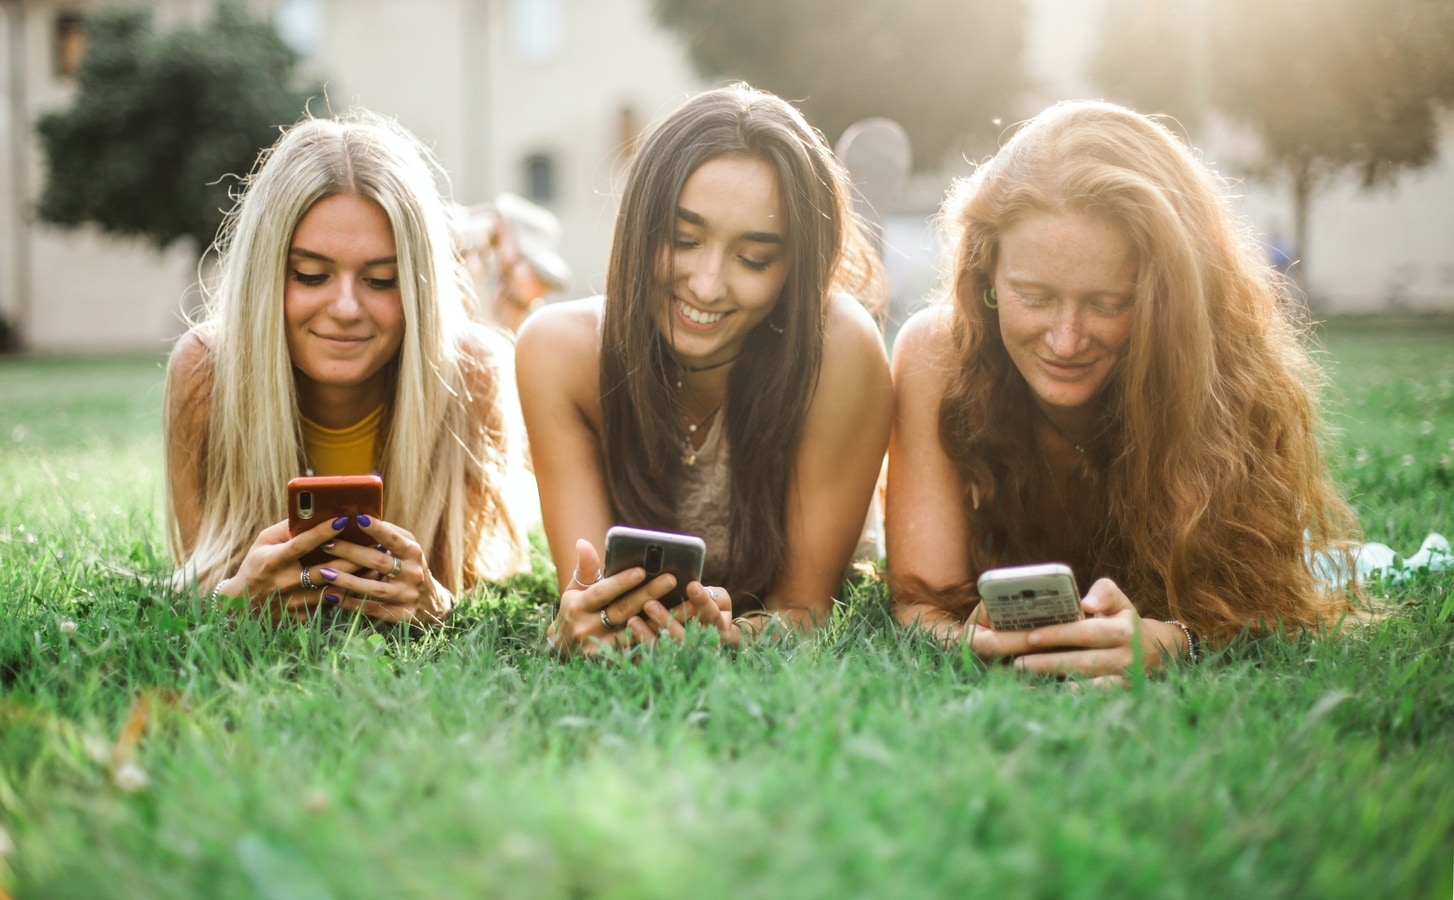 1 in 3 teenagers meet social media 'friends' in real life - BBC News